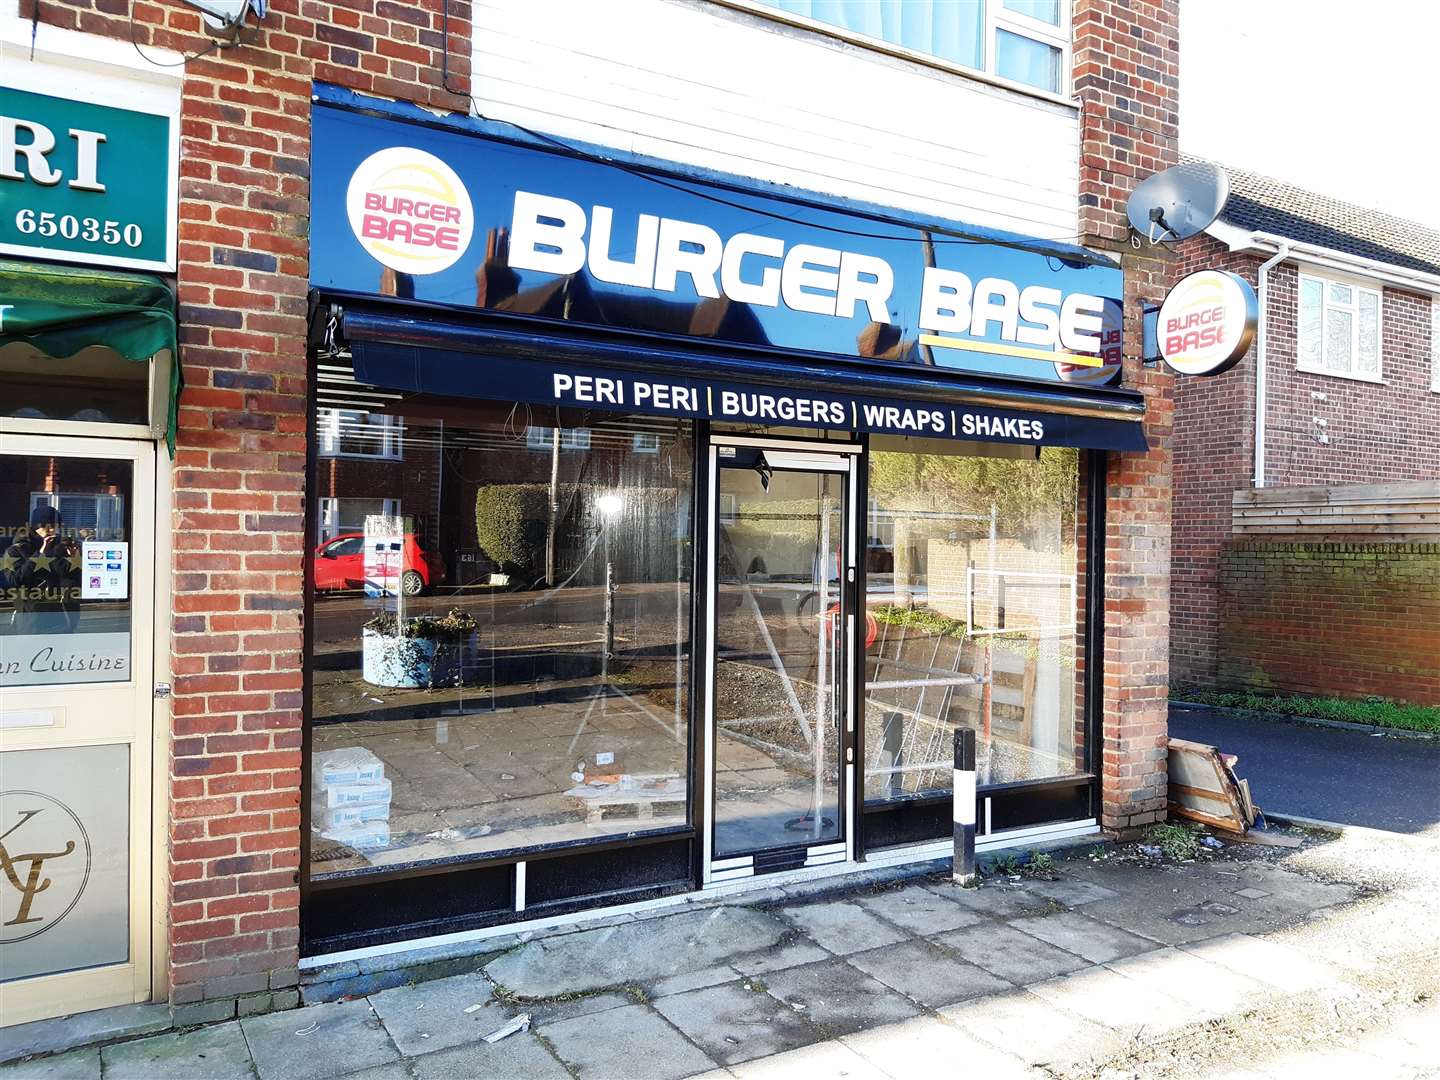 Burger Base is being outfitted ahead of its opening post-lockdown